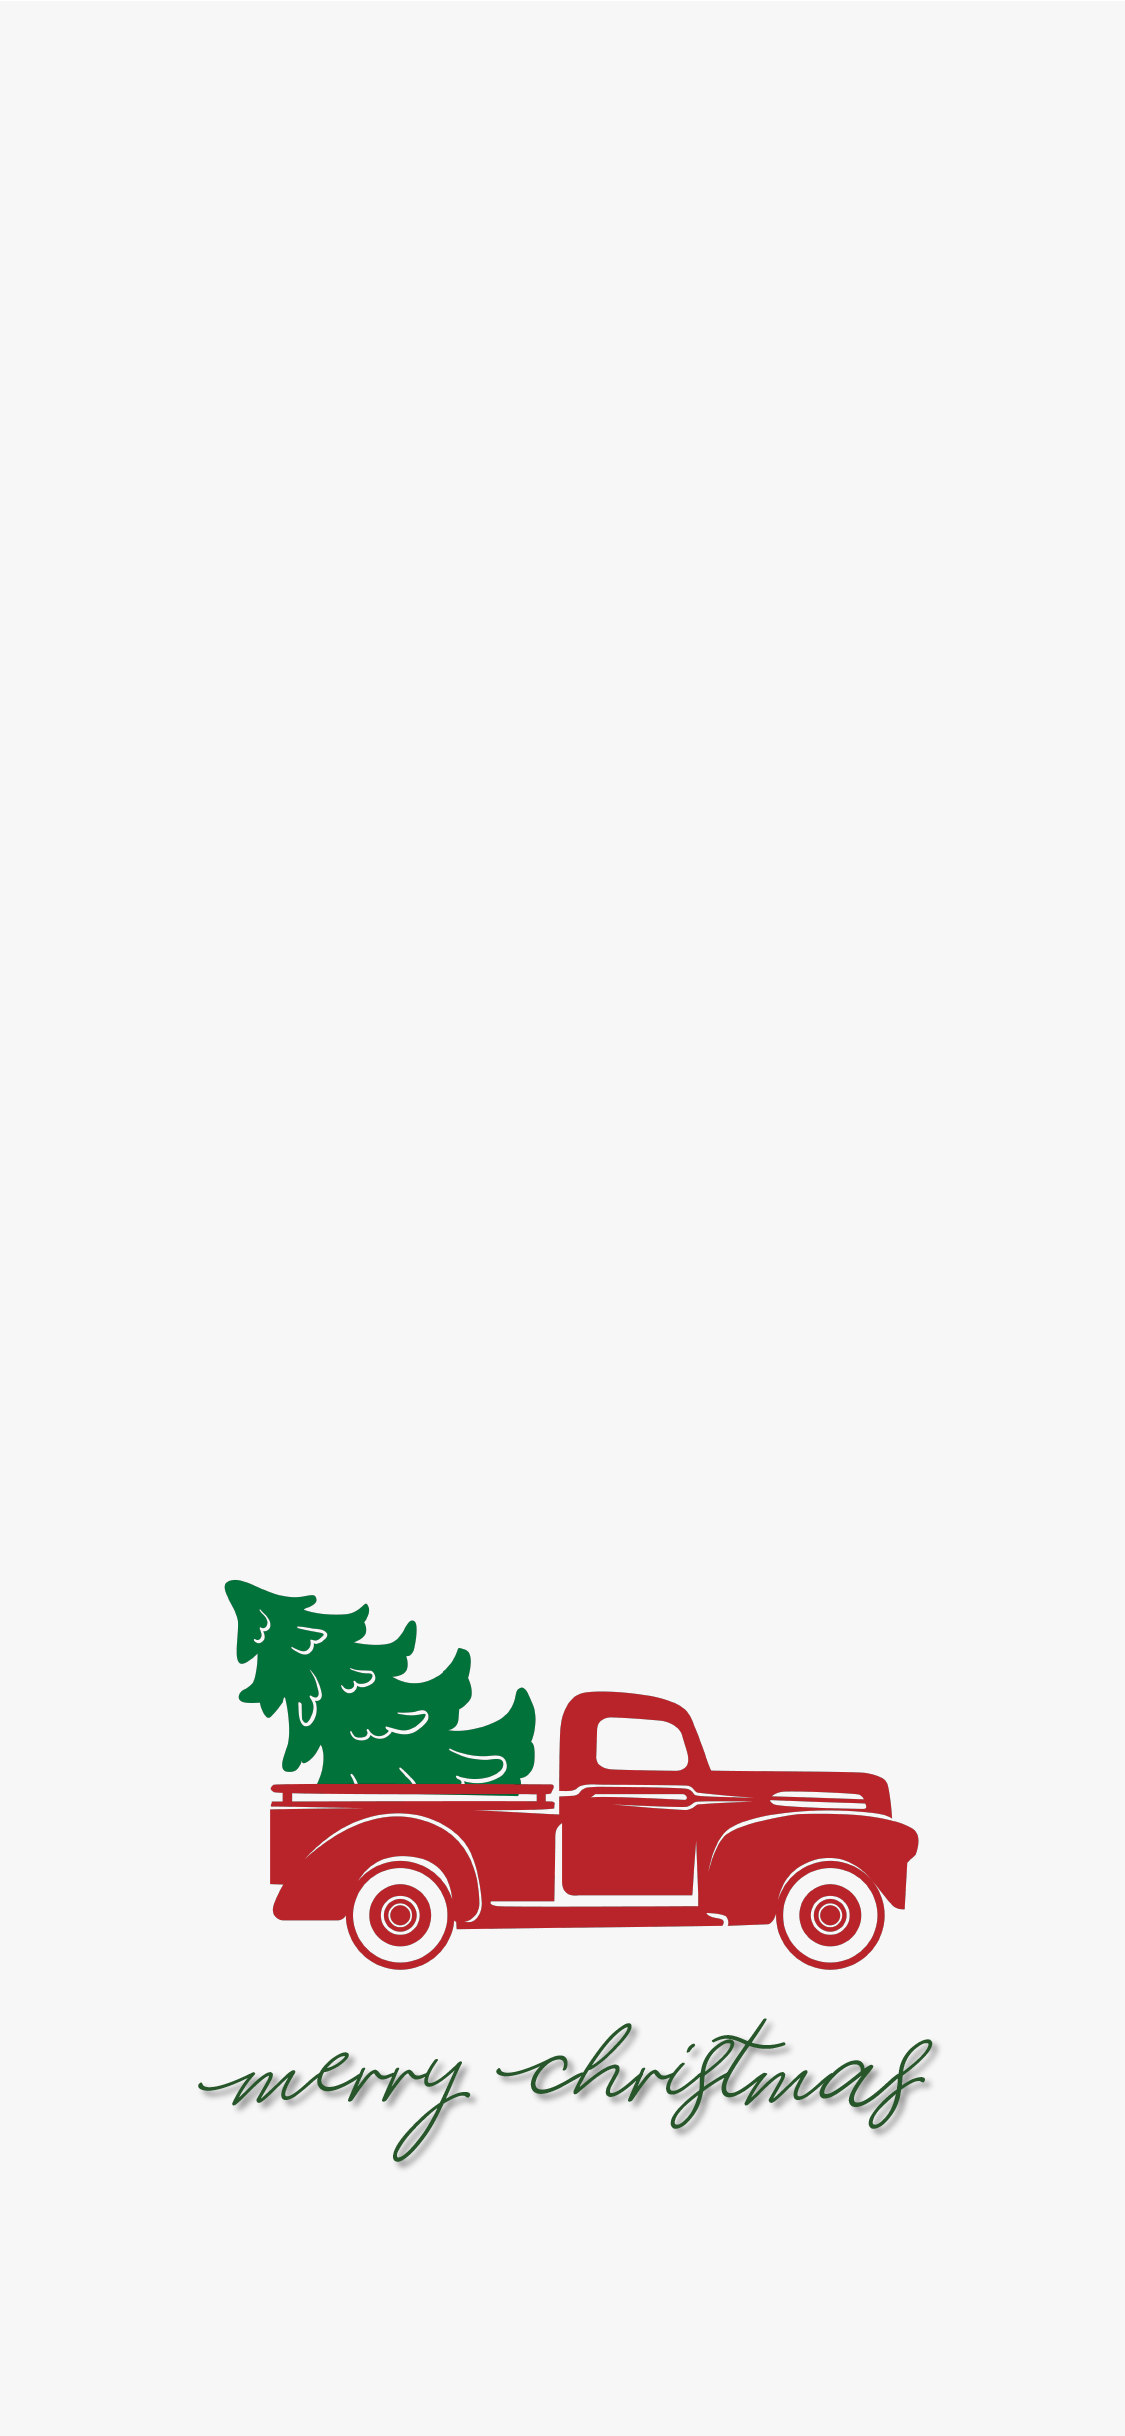 Vintage Red Truck Christmas Images Browse 3390 Stock Photos  Vectors  Free Download with Trial  Shutterstock